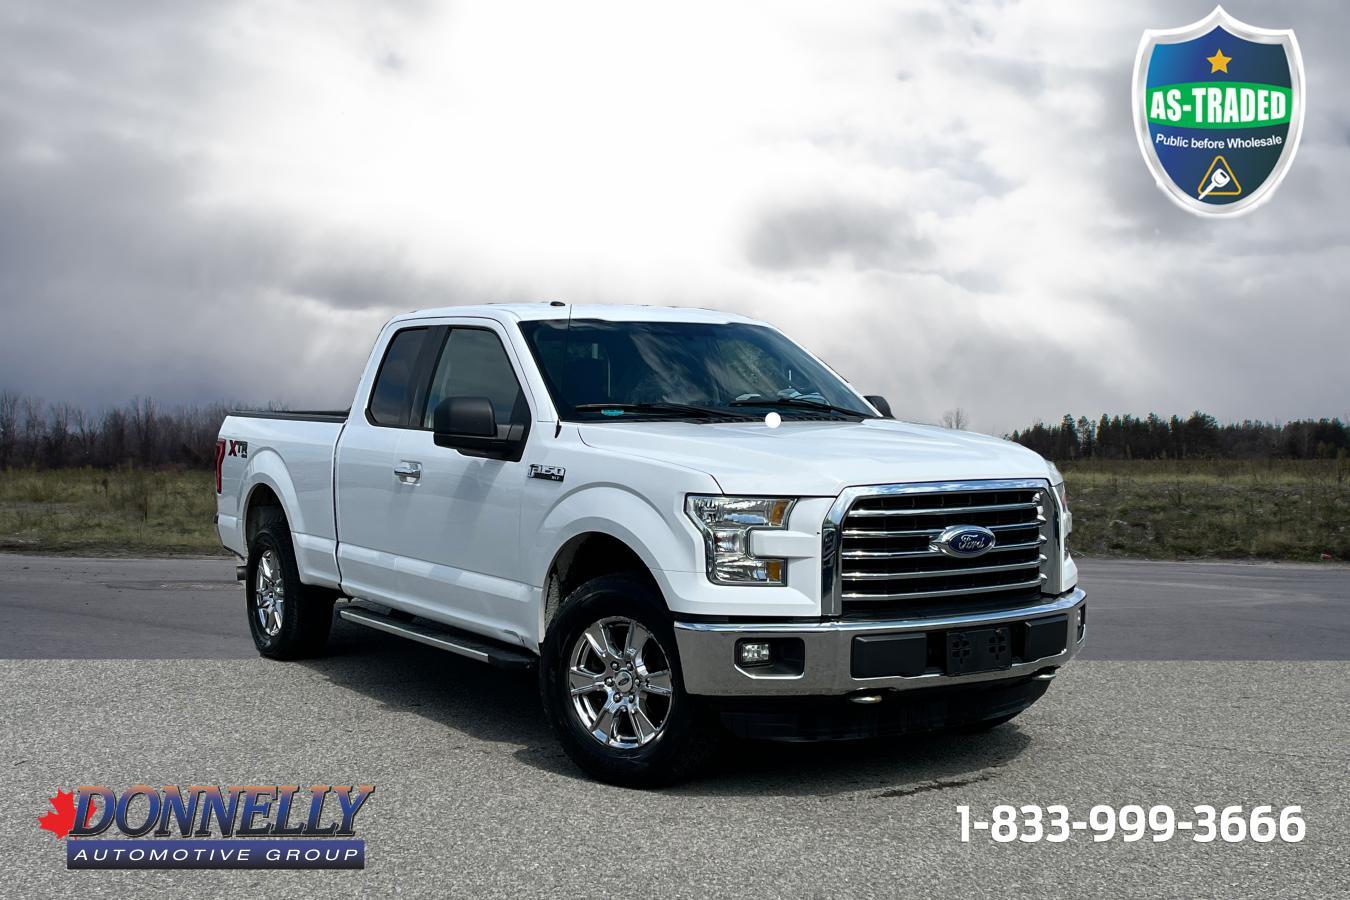 2016 Ford F-150 Unknown